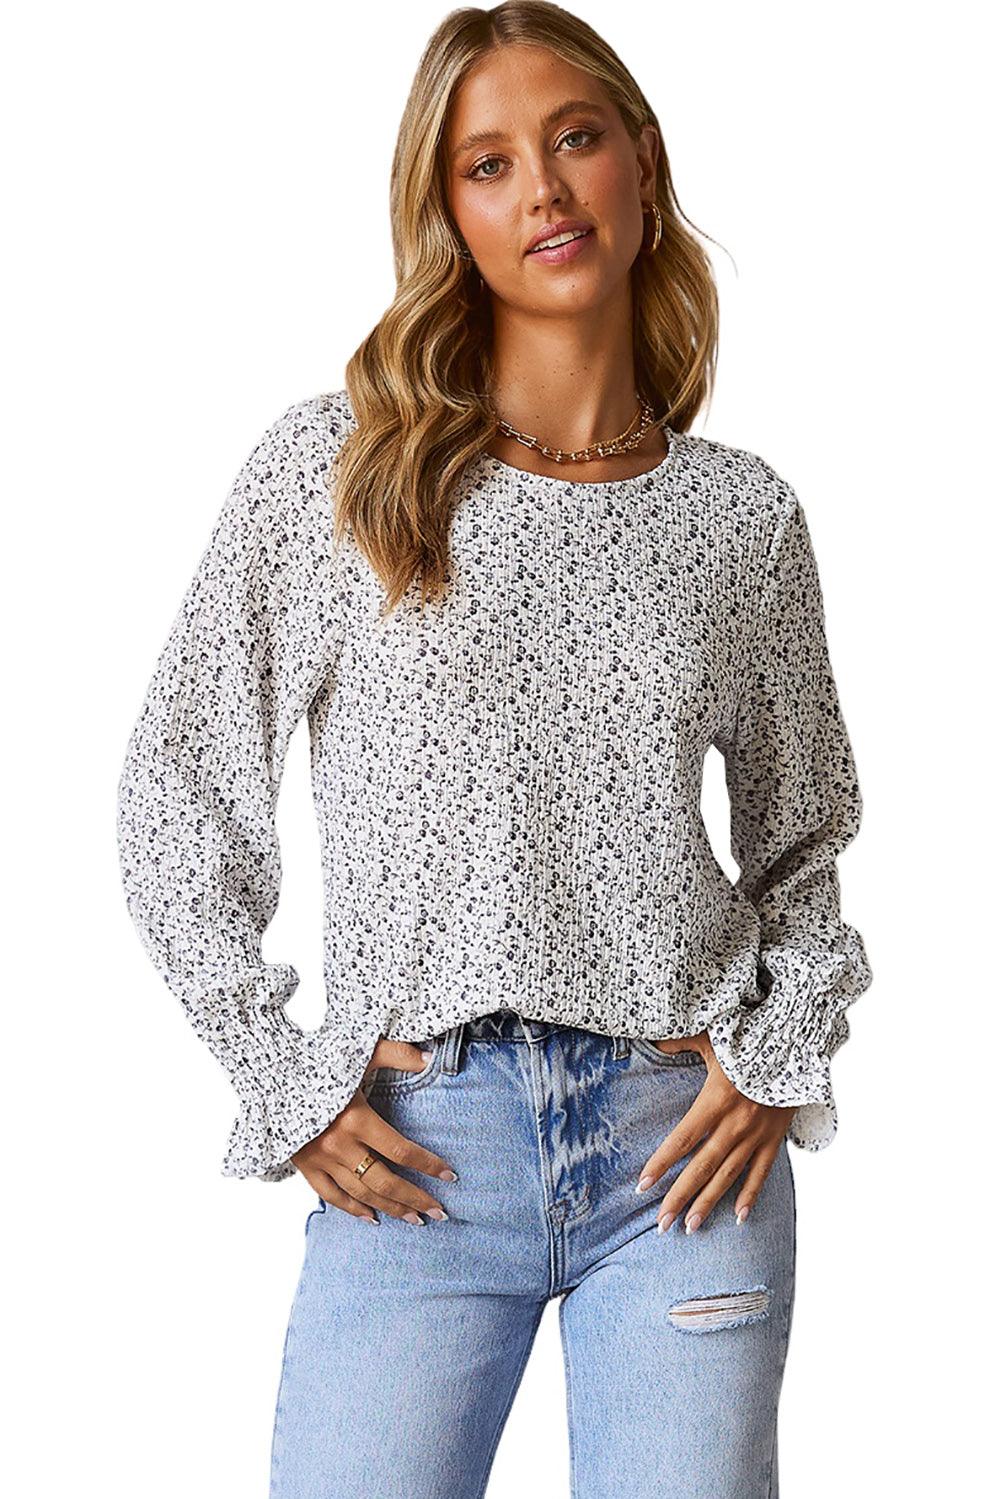 Black Floral Printed Crinkled Ruffled Bubble Sleeve Blouse - L & M Kee, LLC